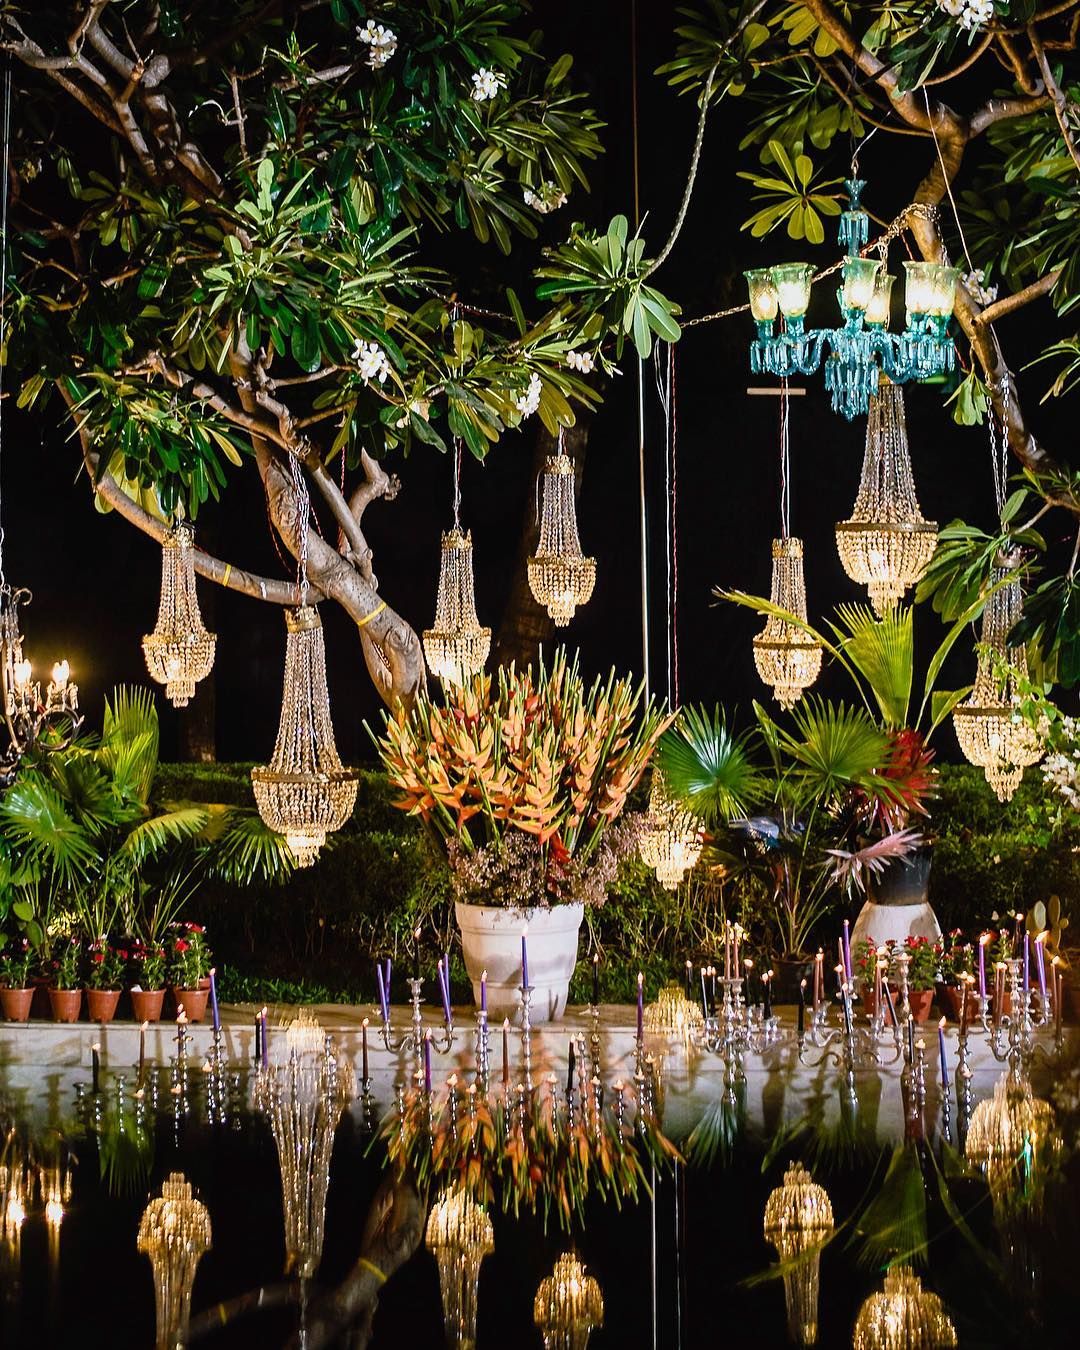 This is how fruits and trees are taking over wedding decor